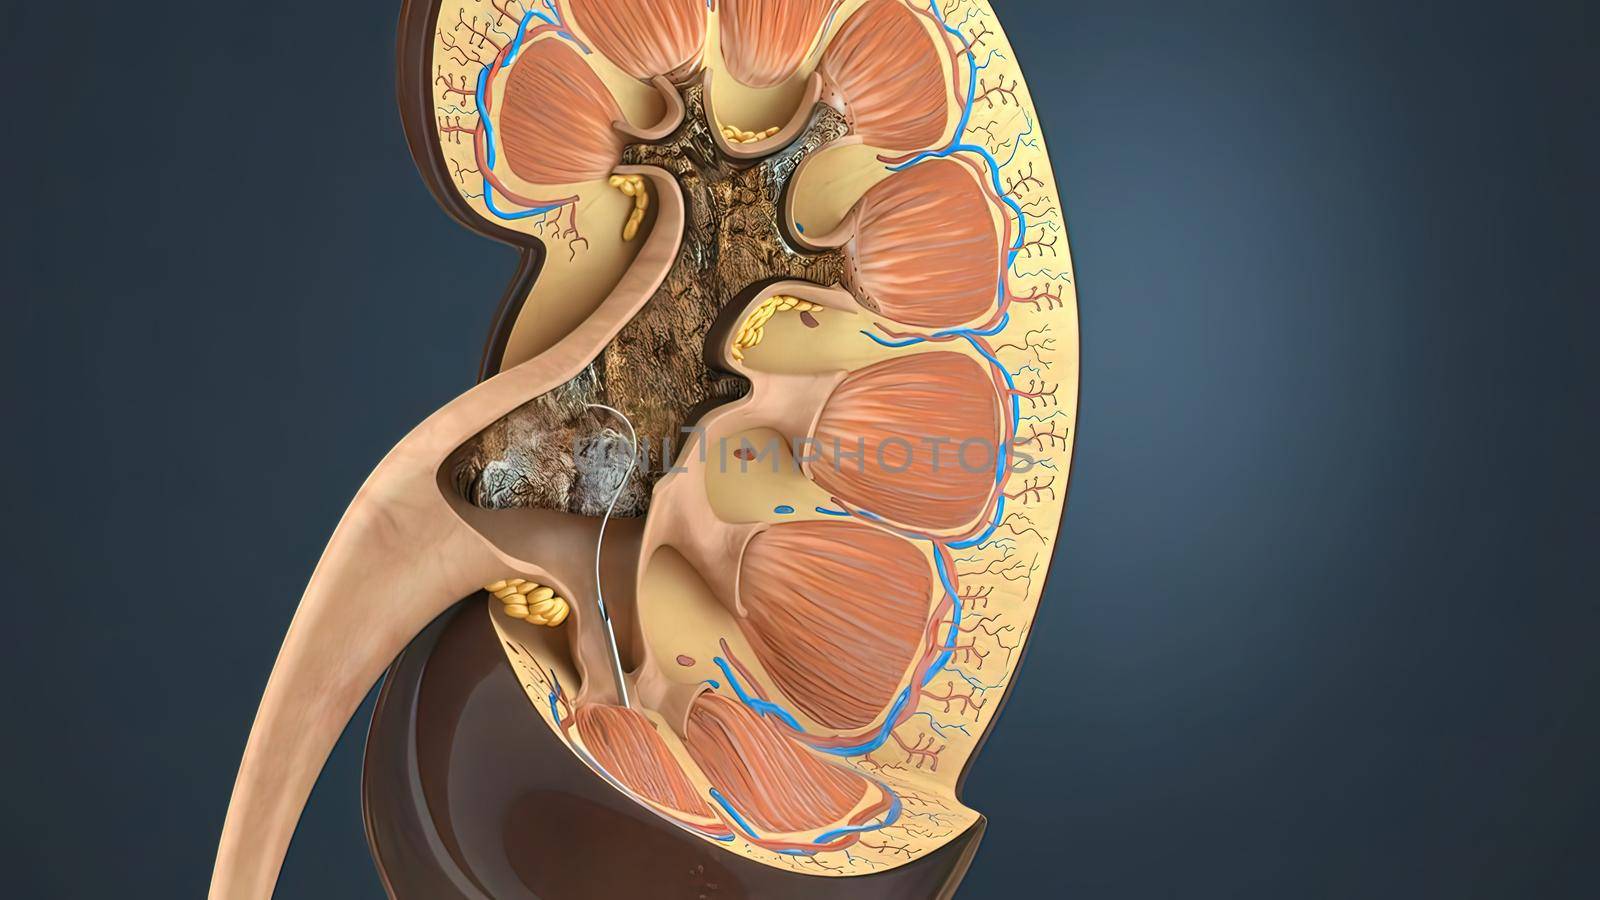 Lithotripsy treats kidney stones by sending focused ultrasonic energy or shock waves directly to the stone first located with fluoroscopy 3D illustration